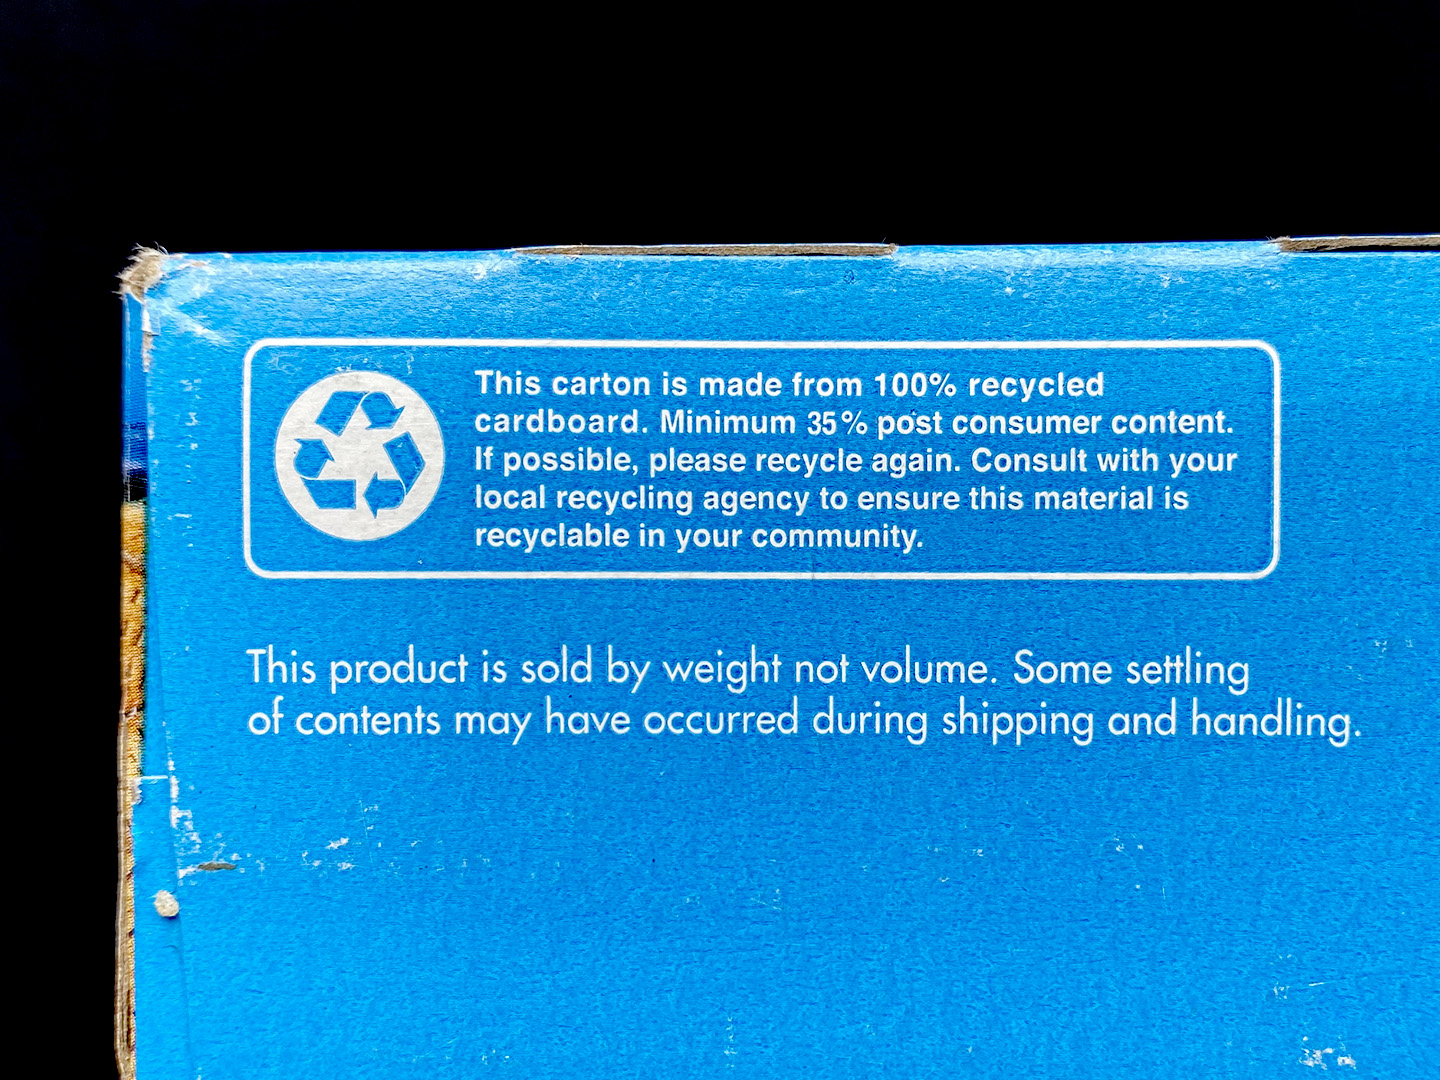 A recycling emblem on the bottom of a cereal box reads "This carton is made from 100% recycled cardboard. Minimum 35% post consumer content. If possible, please recycle again. Consult with your local recycling agency to ensure this material is recyclable in your community".